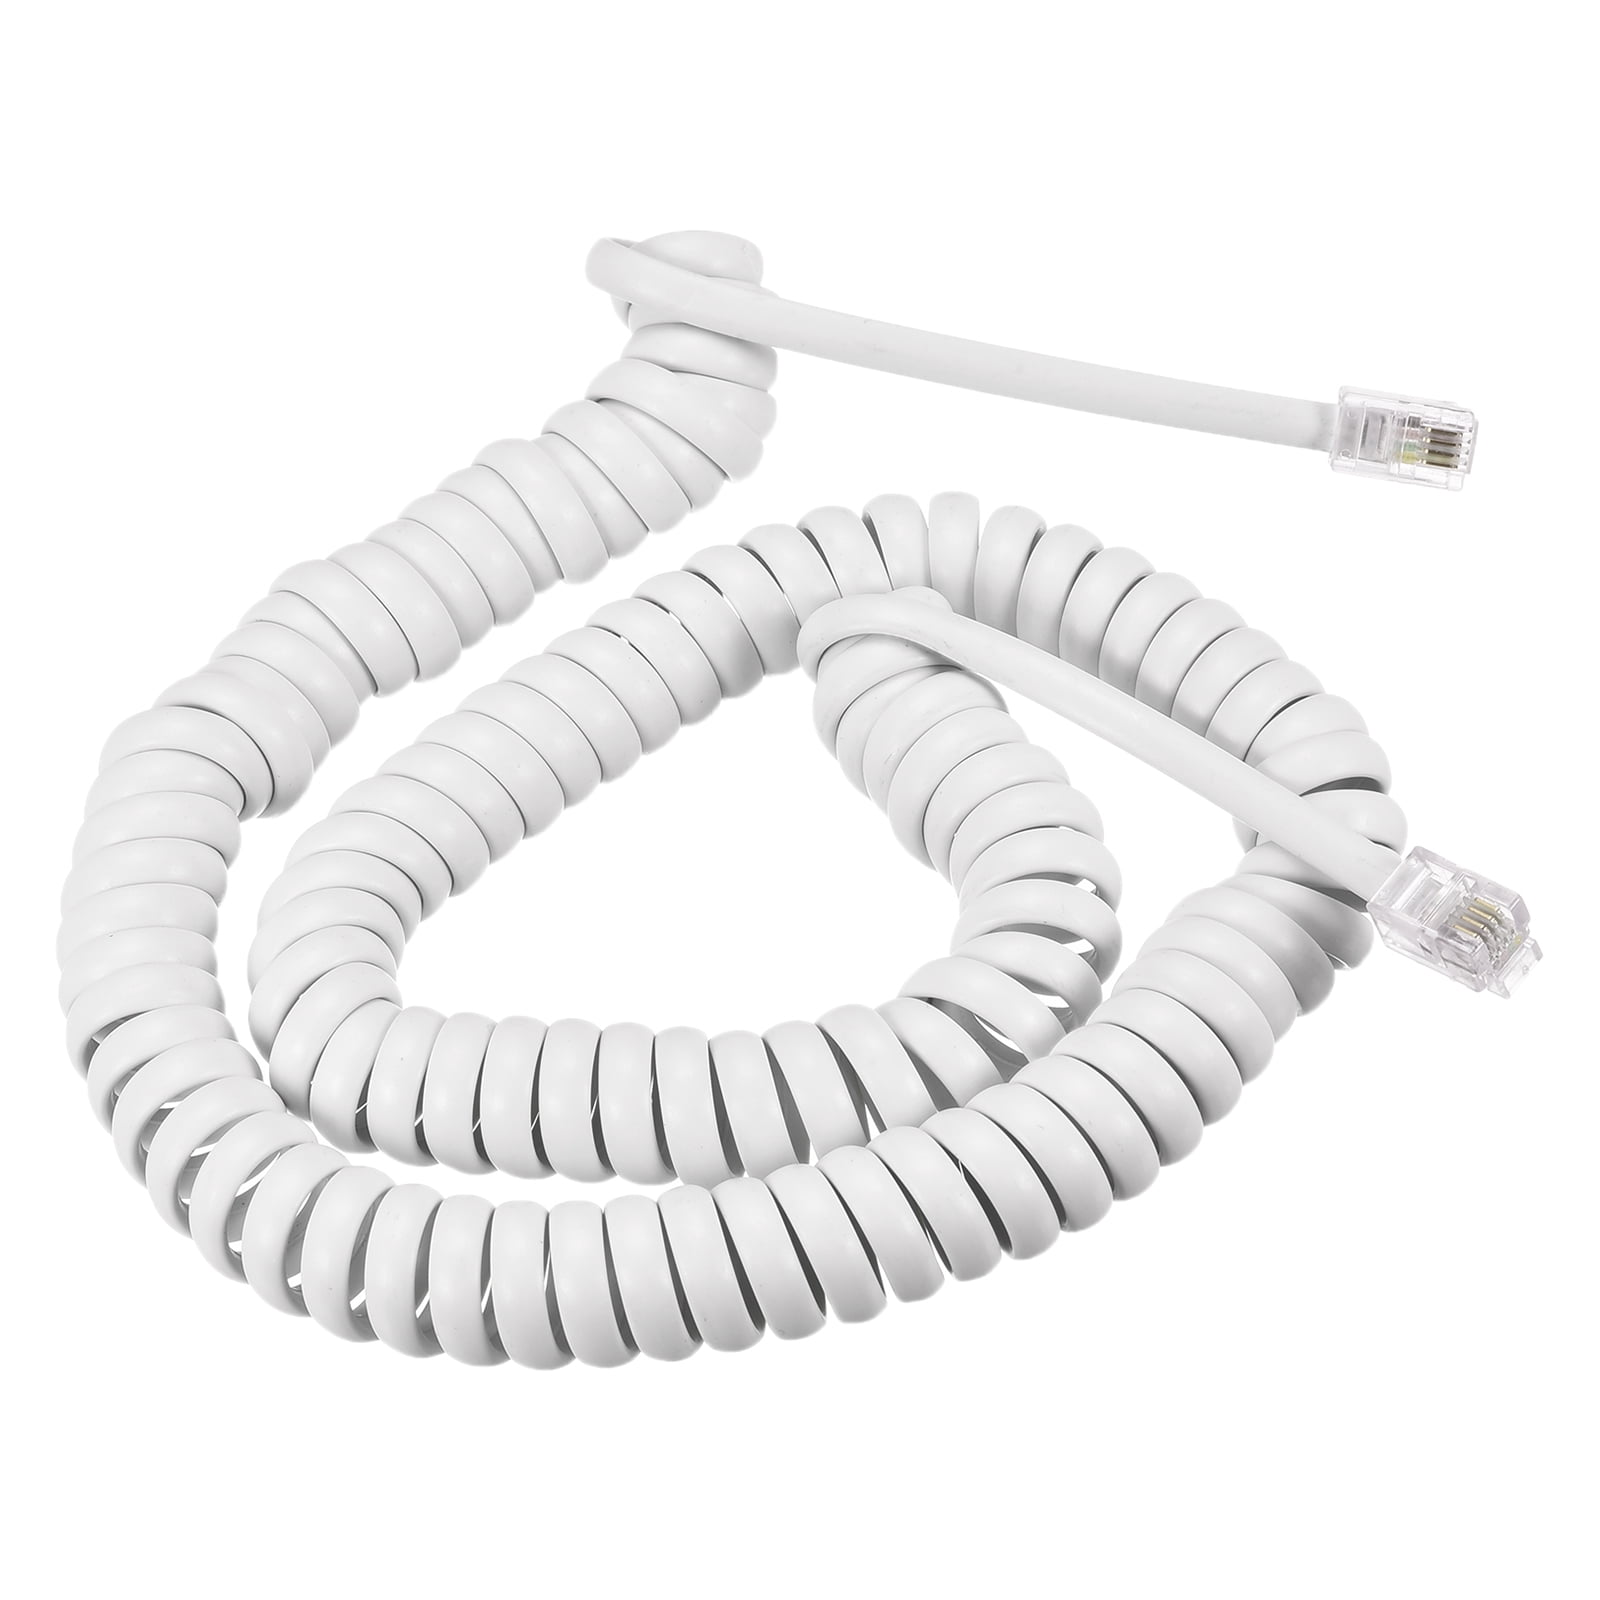 RJ10 Telephone Cable Handset Coiled Phone Curly Cord Spiral Wire 2M 3M 5M 